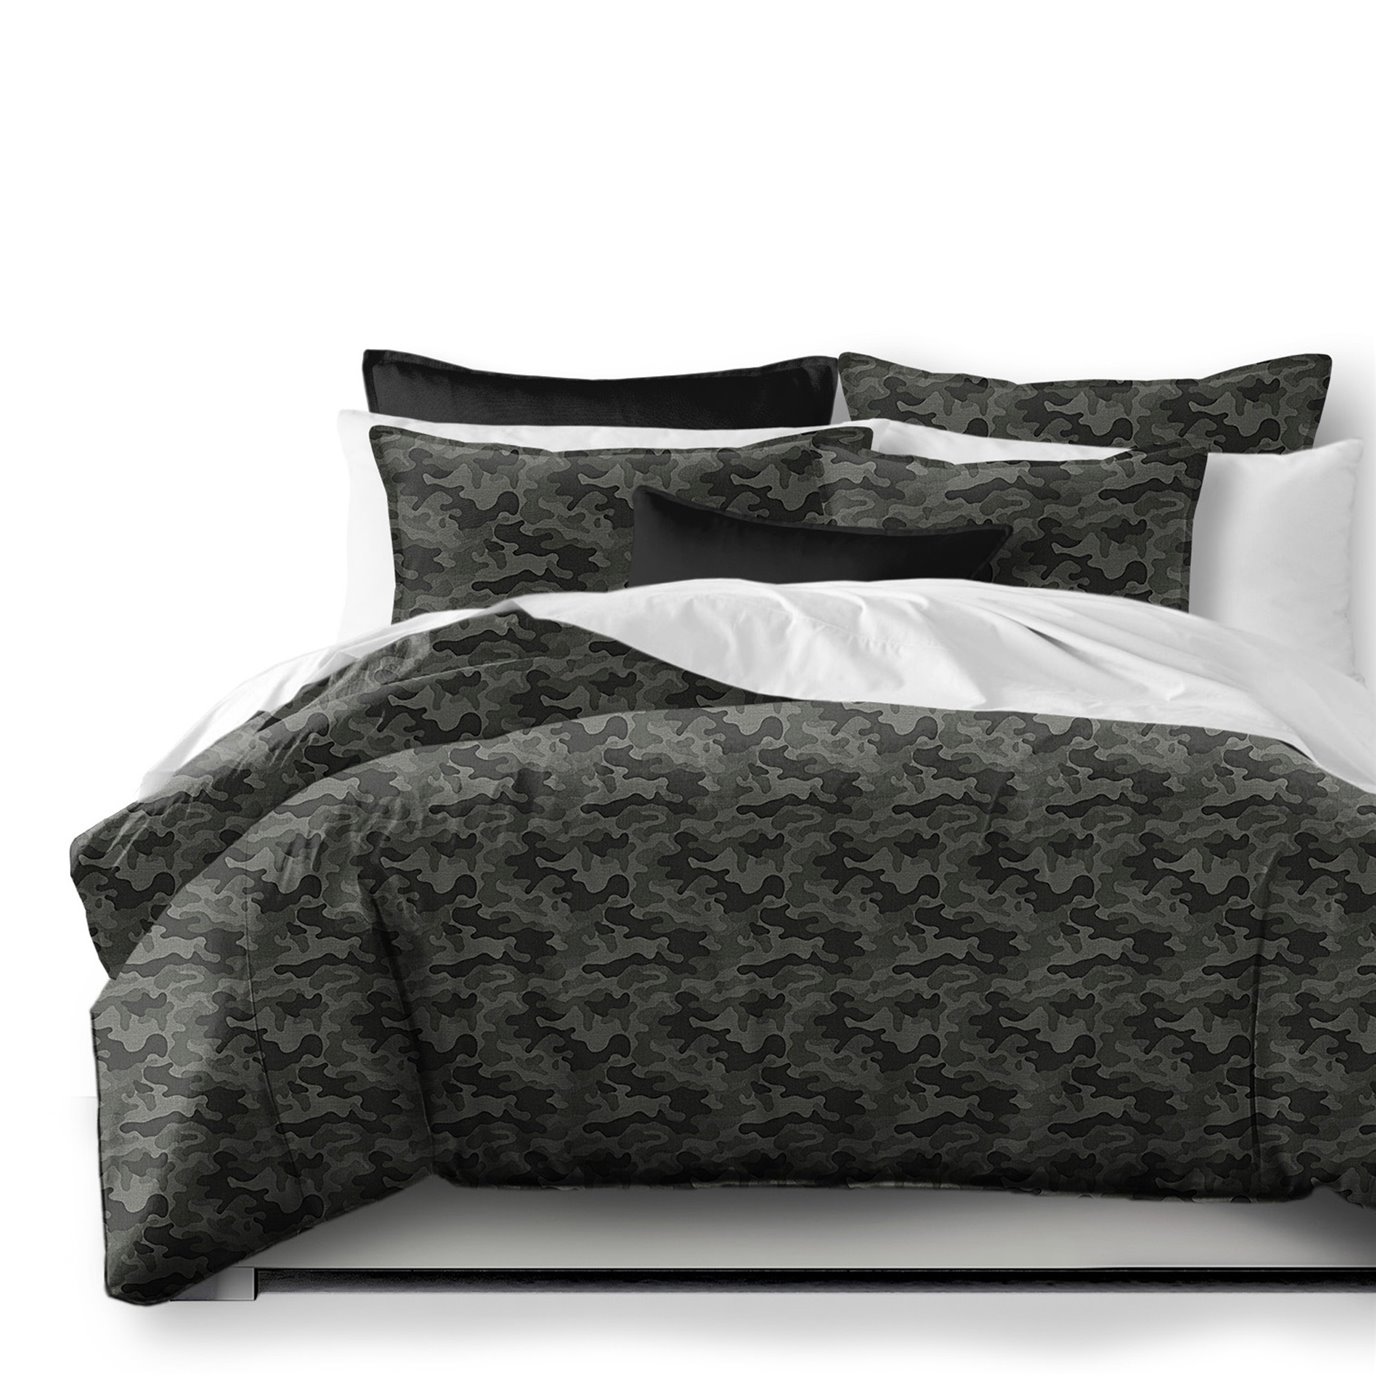 Basic Camo Army Green Comforter and Pillow Sham(s) Set - Size Queen